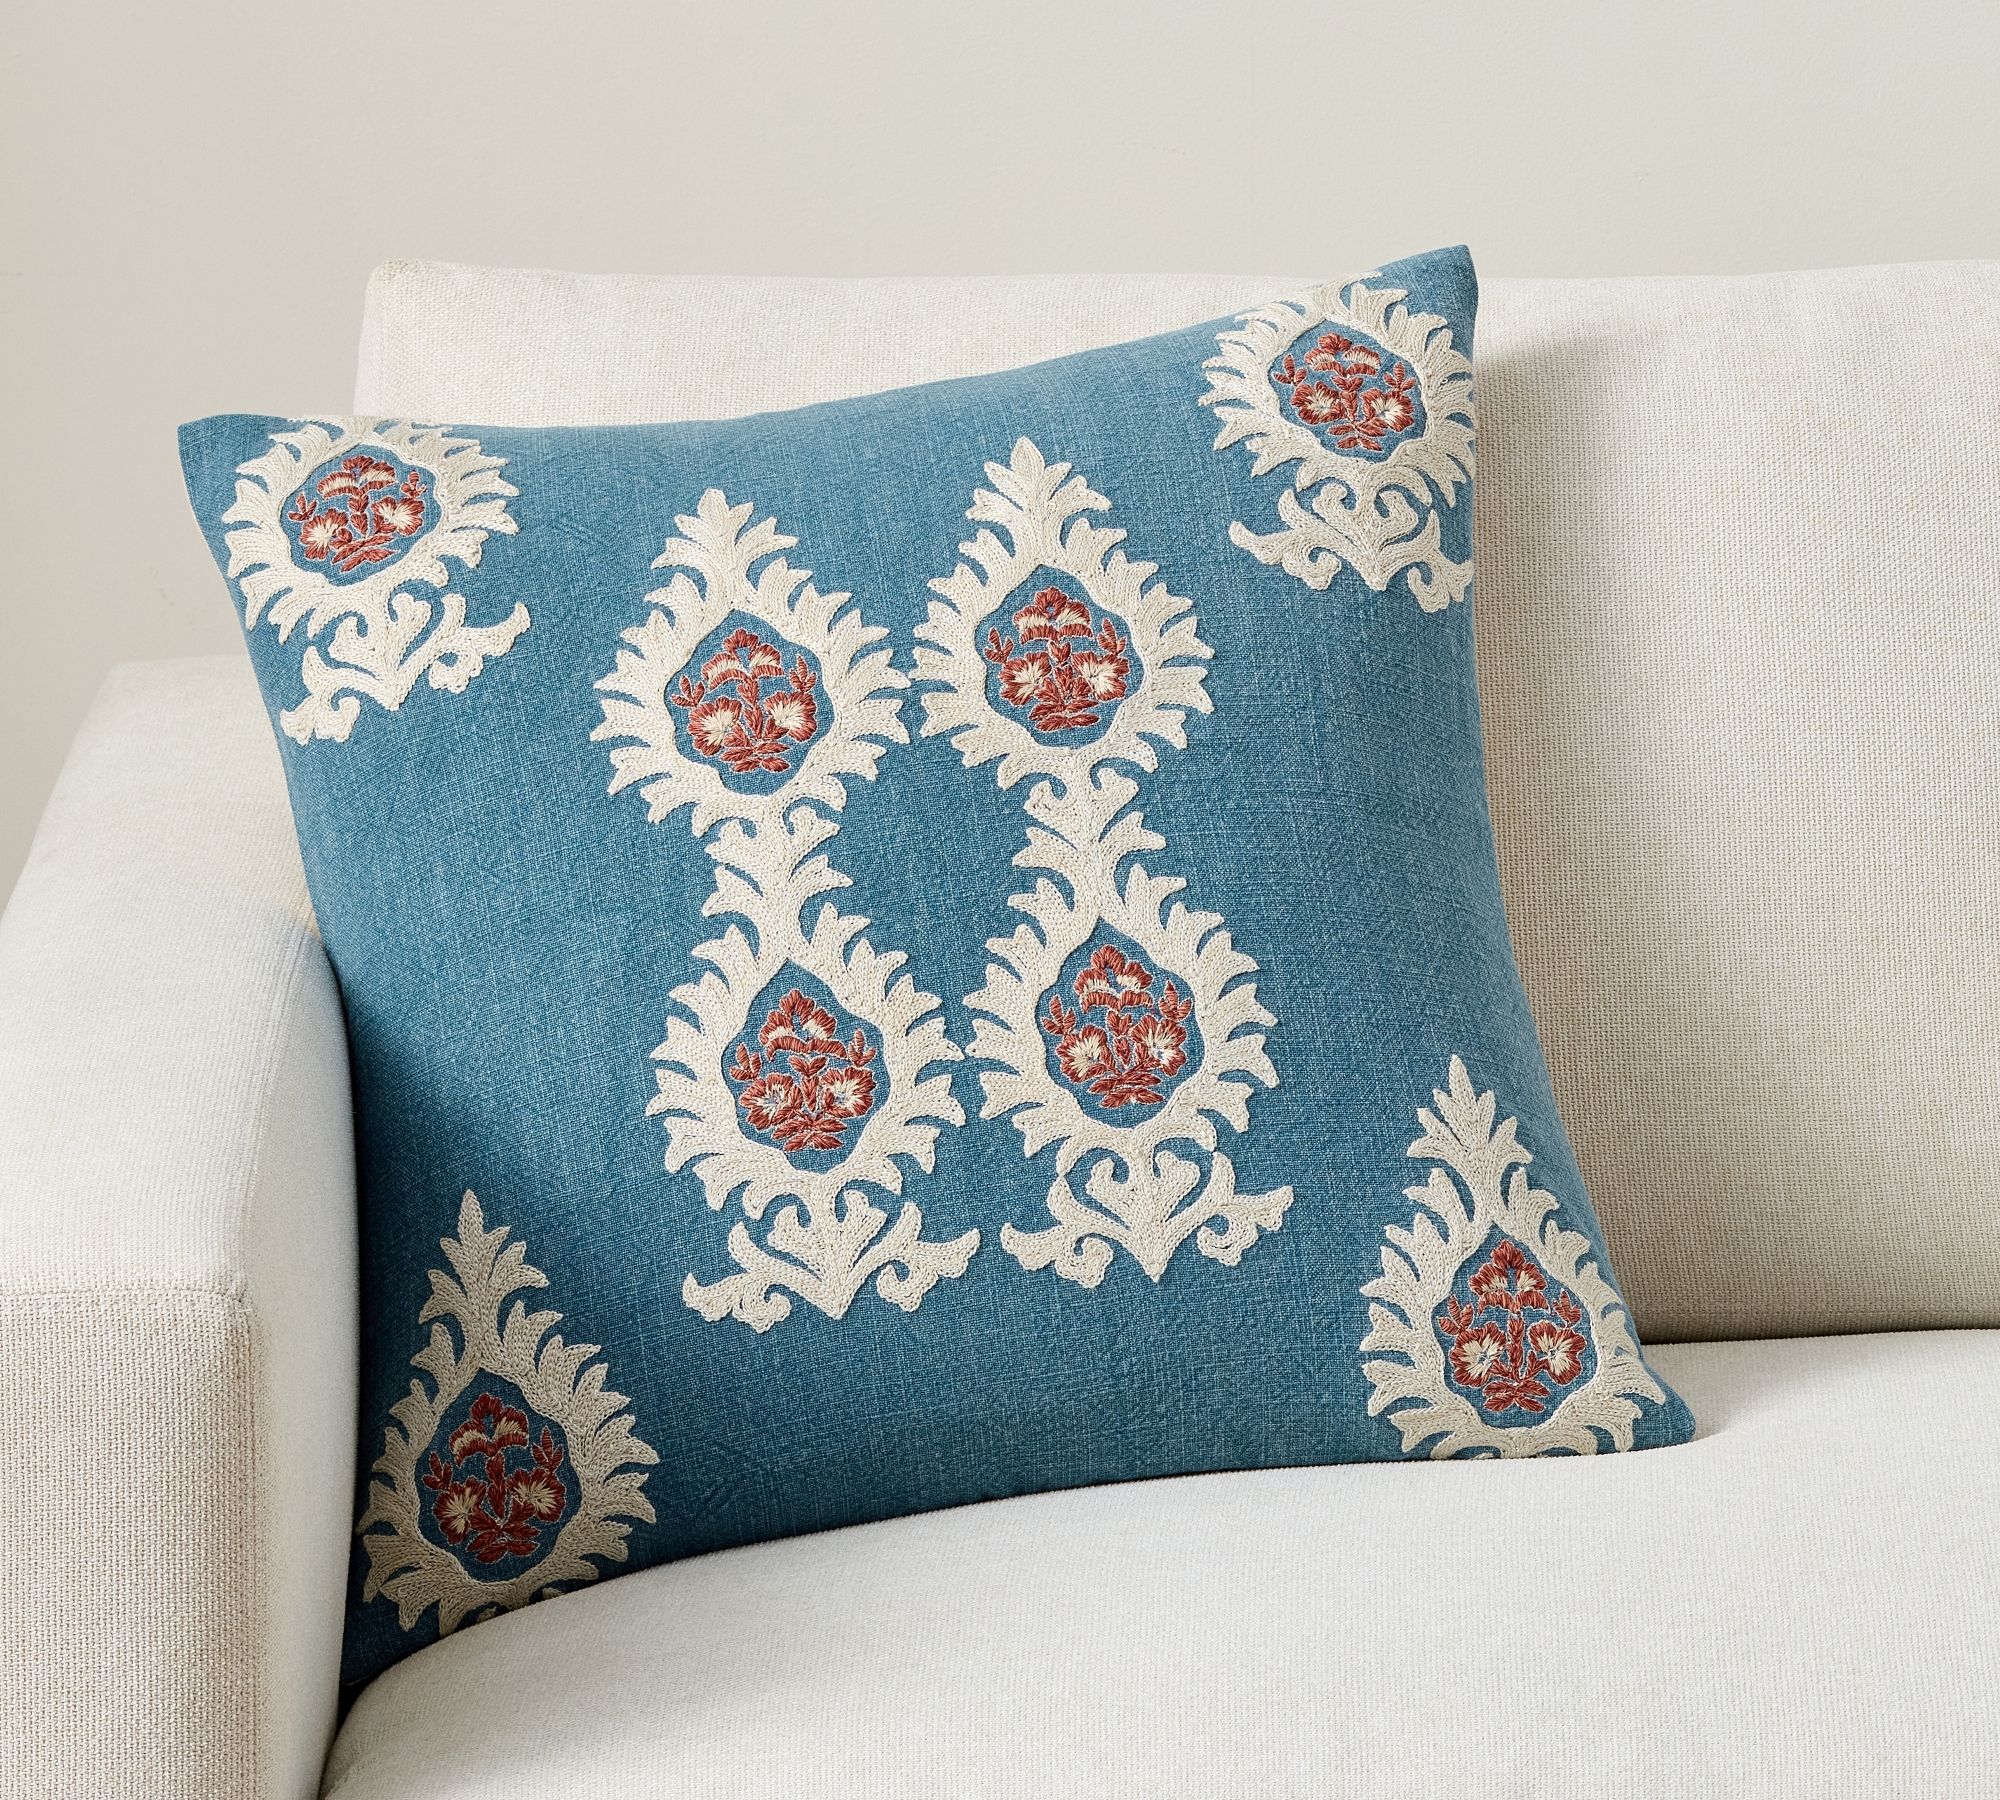 Siena Embroidered Pillow